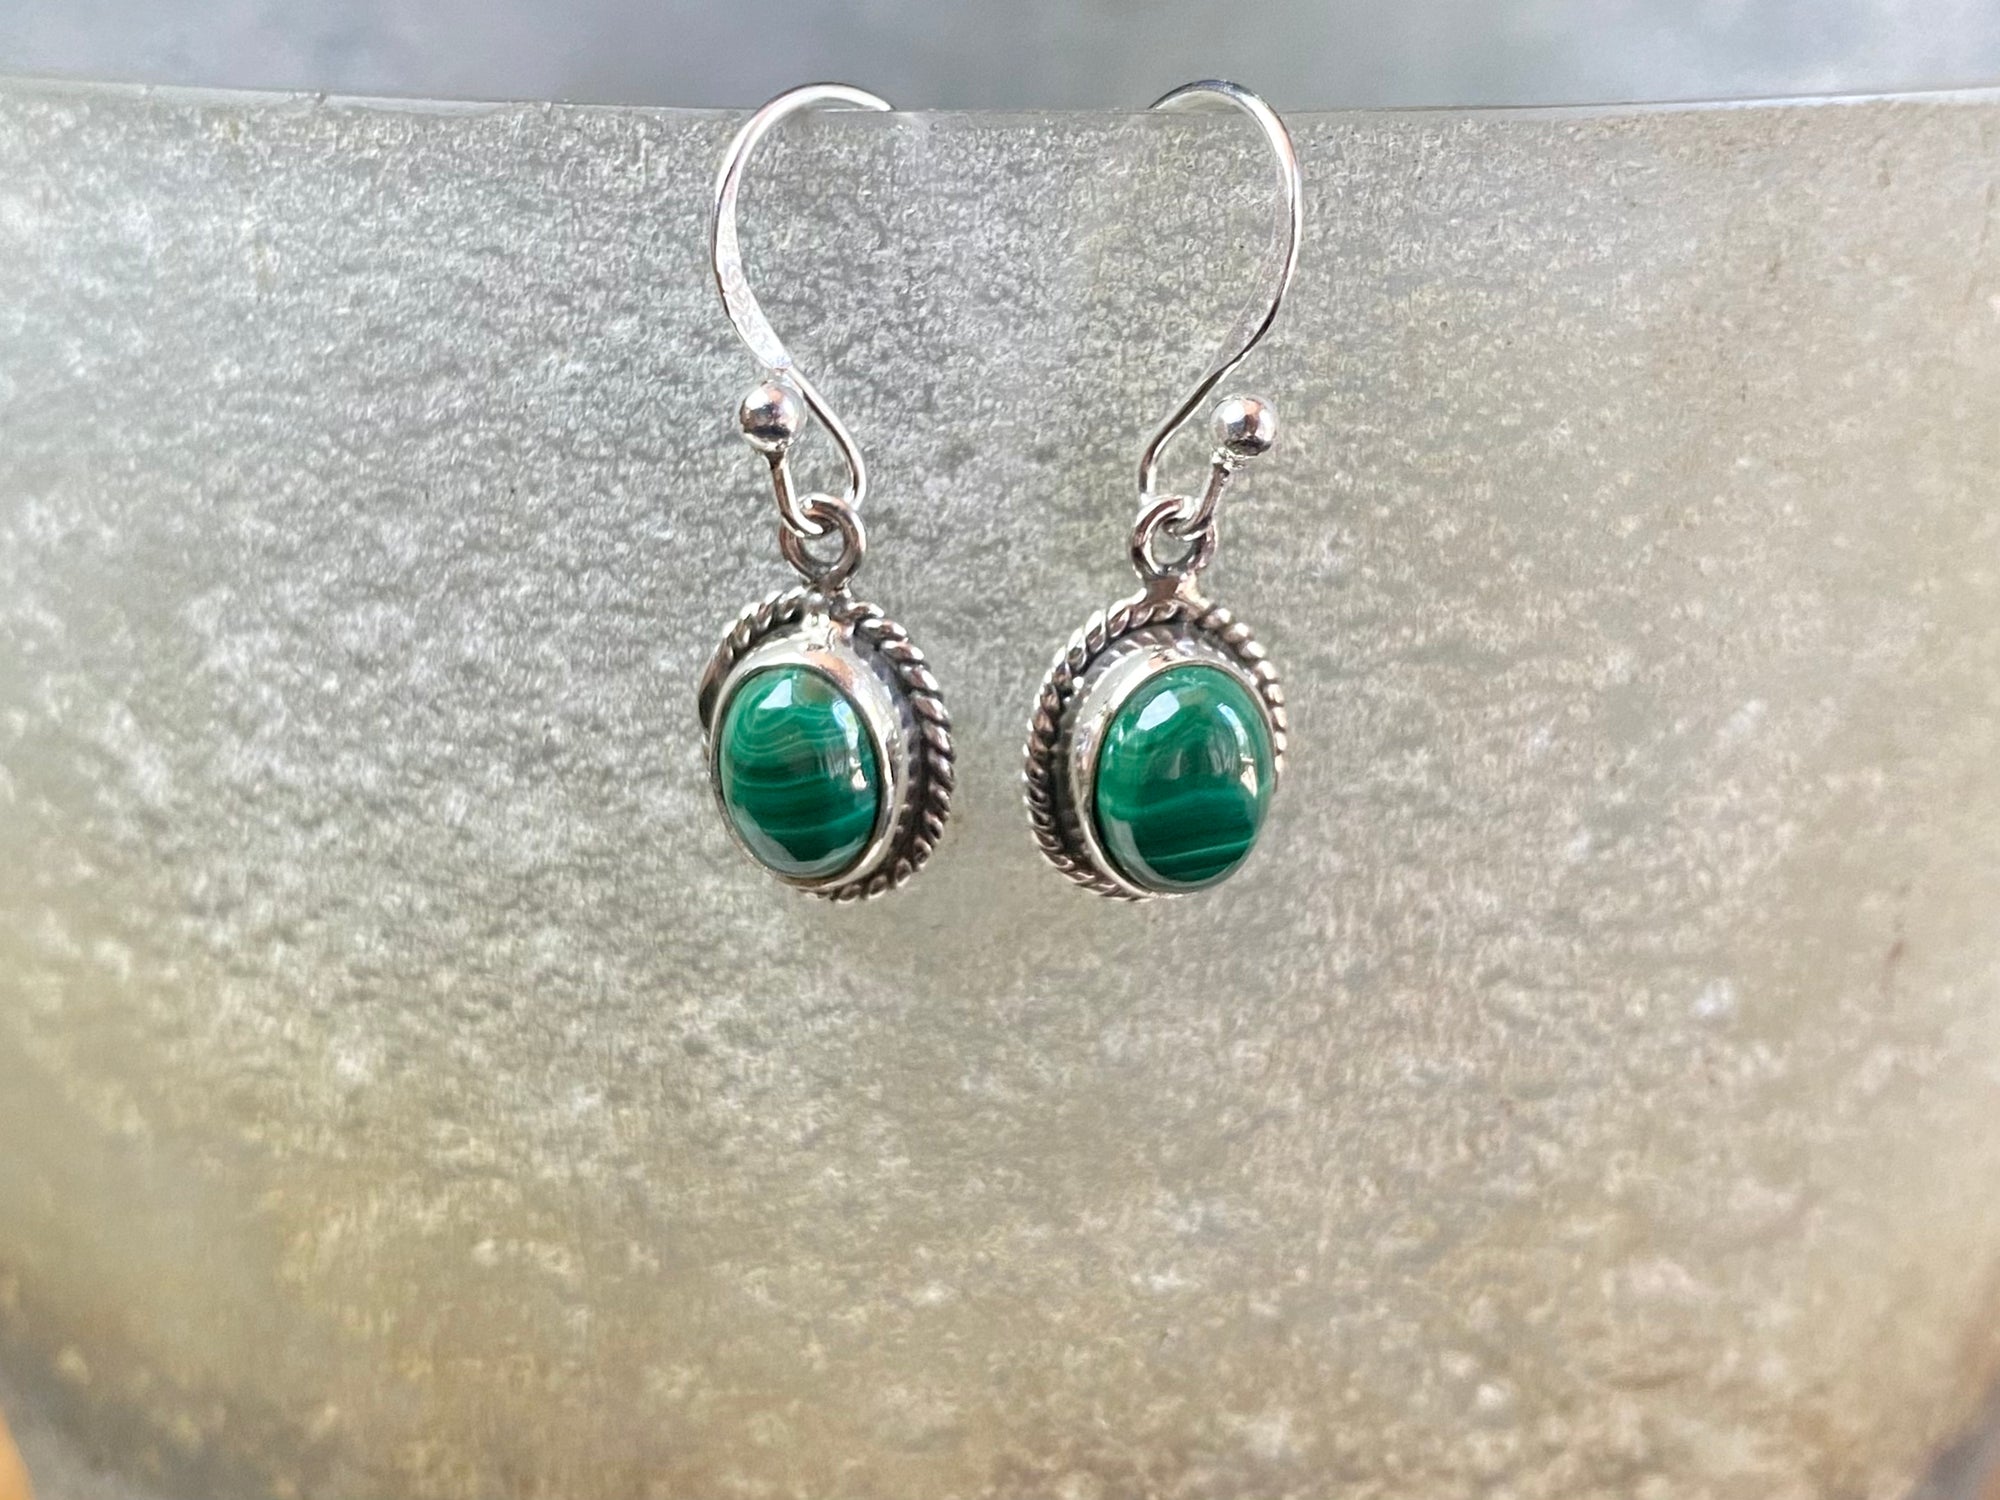 Elegant oval shaped earrings with a beautifully detailed bezel to show off the natural beauty of the cabochon stones. Sterling silver hooks complete the look. Our earrings are open-backed to allow natural light to show through. Length including hook 2.5 cm